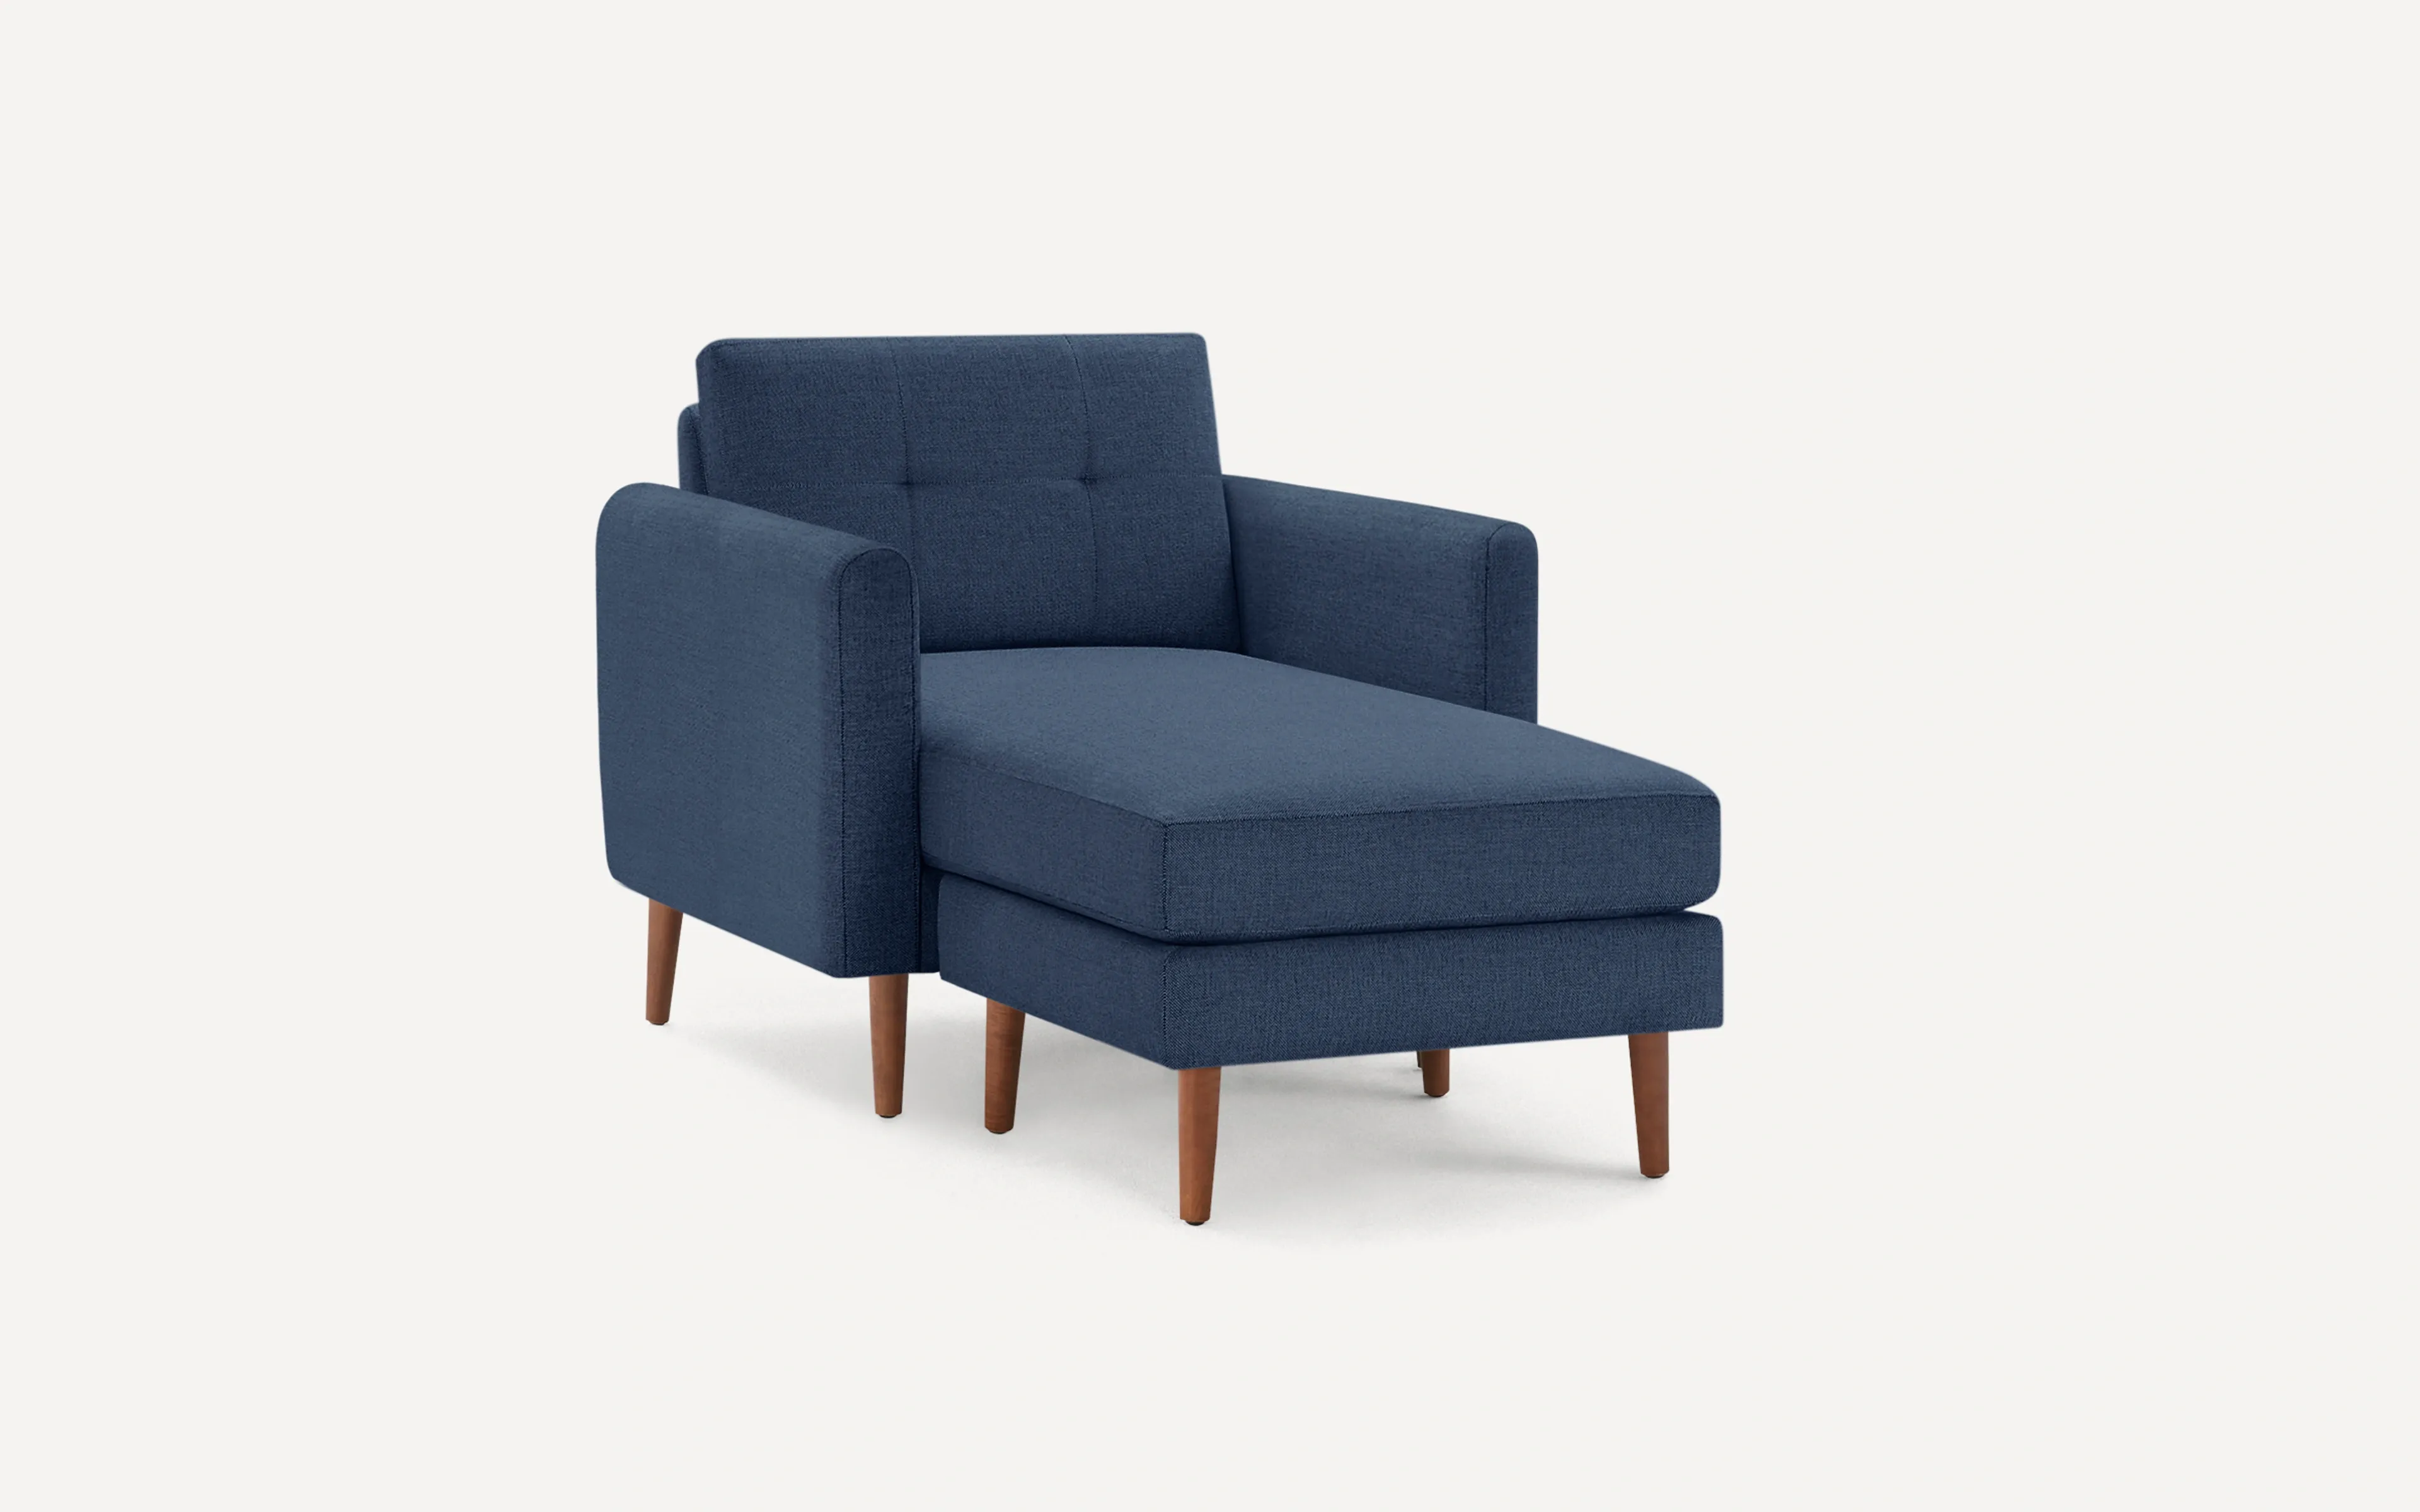 Original Nomad Chaise Armchair in Navy Blue Fabric